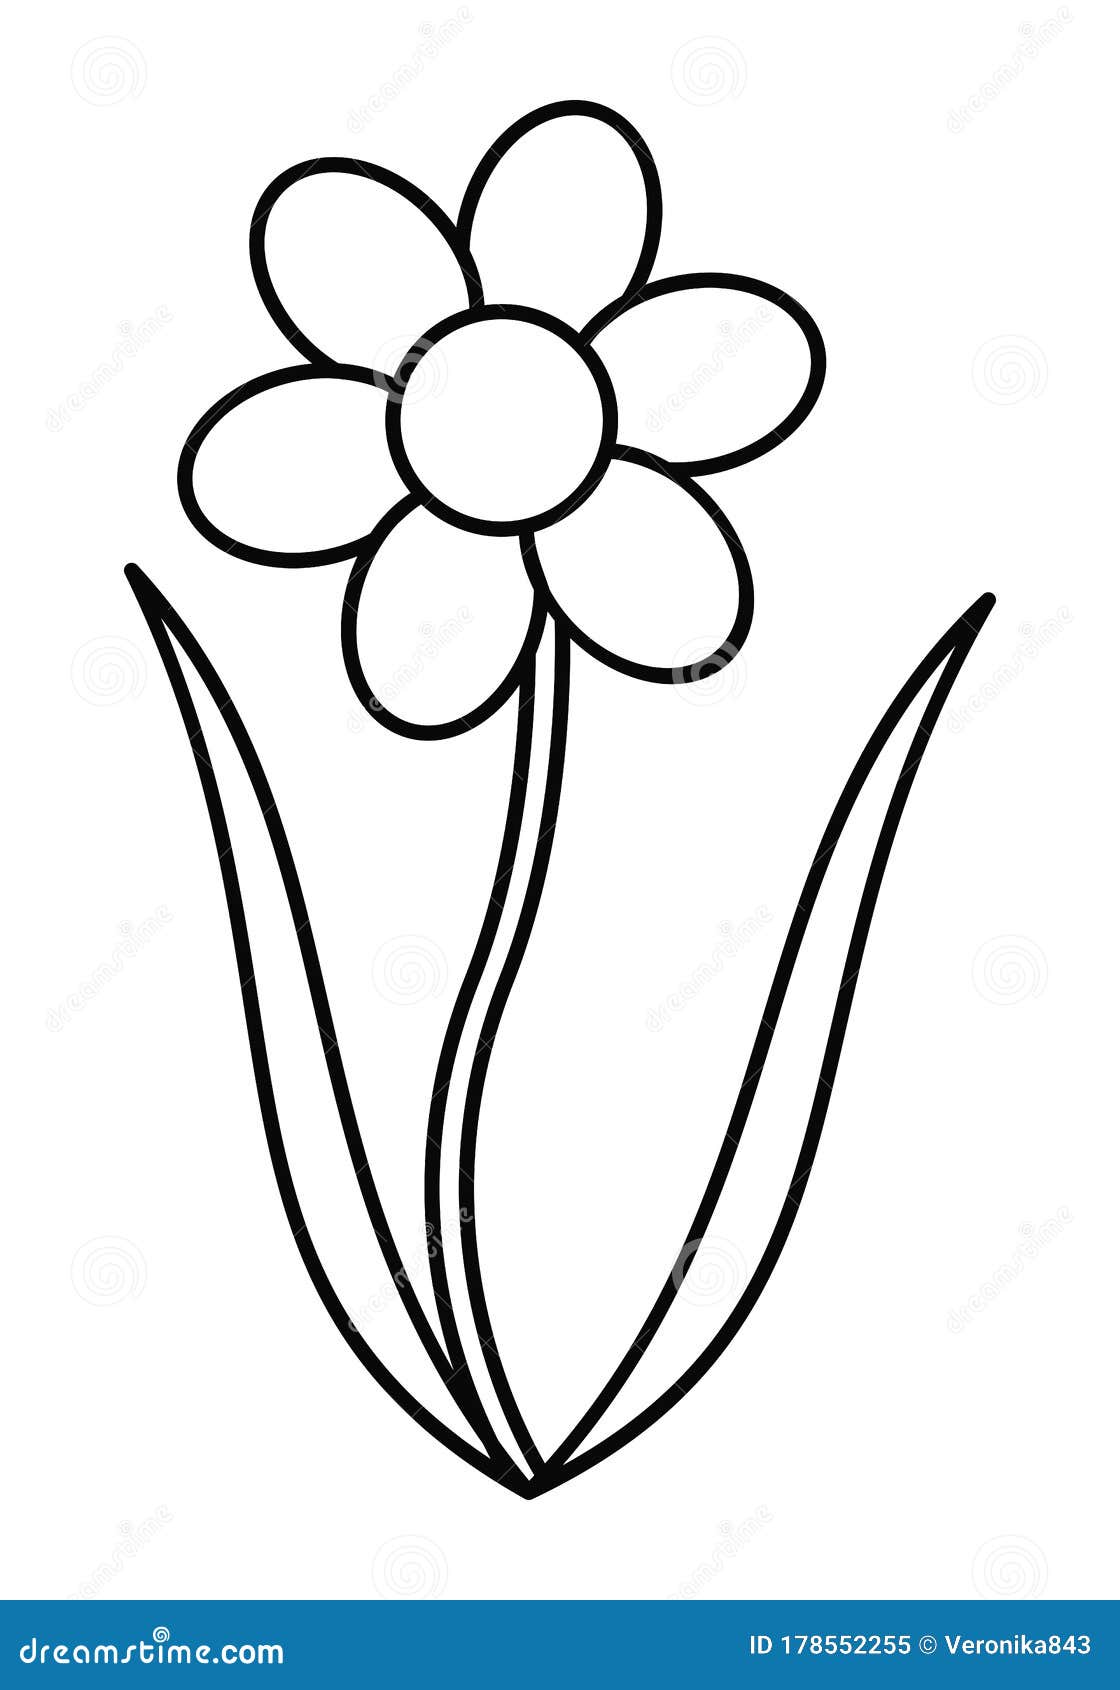 Cartoon Flower. Coloring Book Page for Children. Outline Vector ...